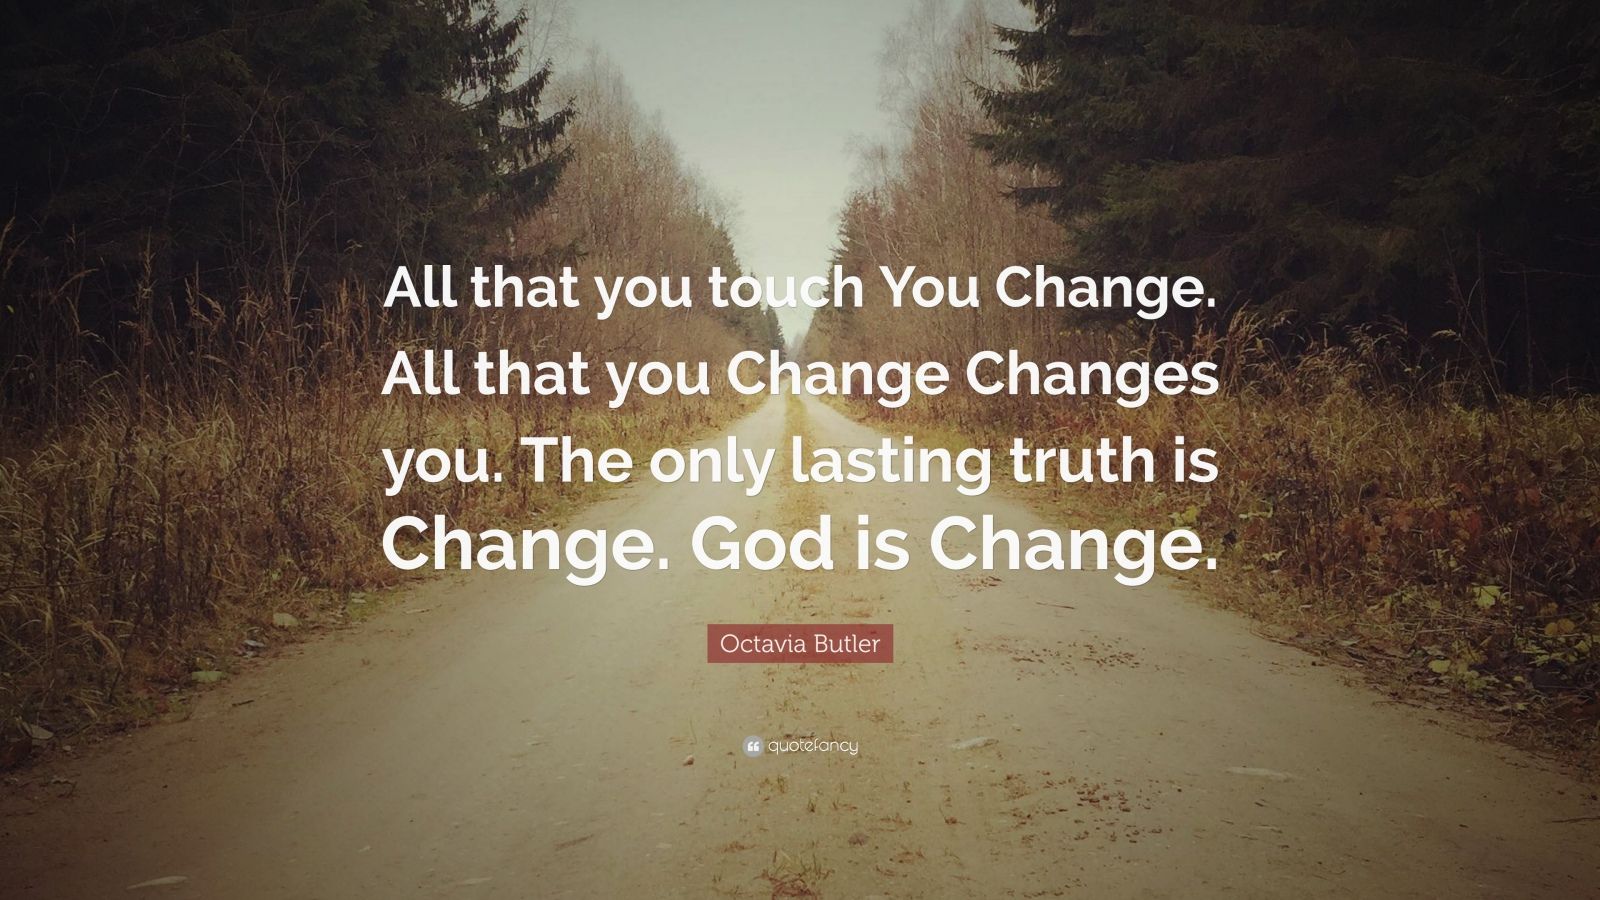 Octavia Butler Quote: “All that you touch You Change. All that you ...